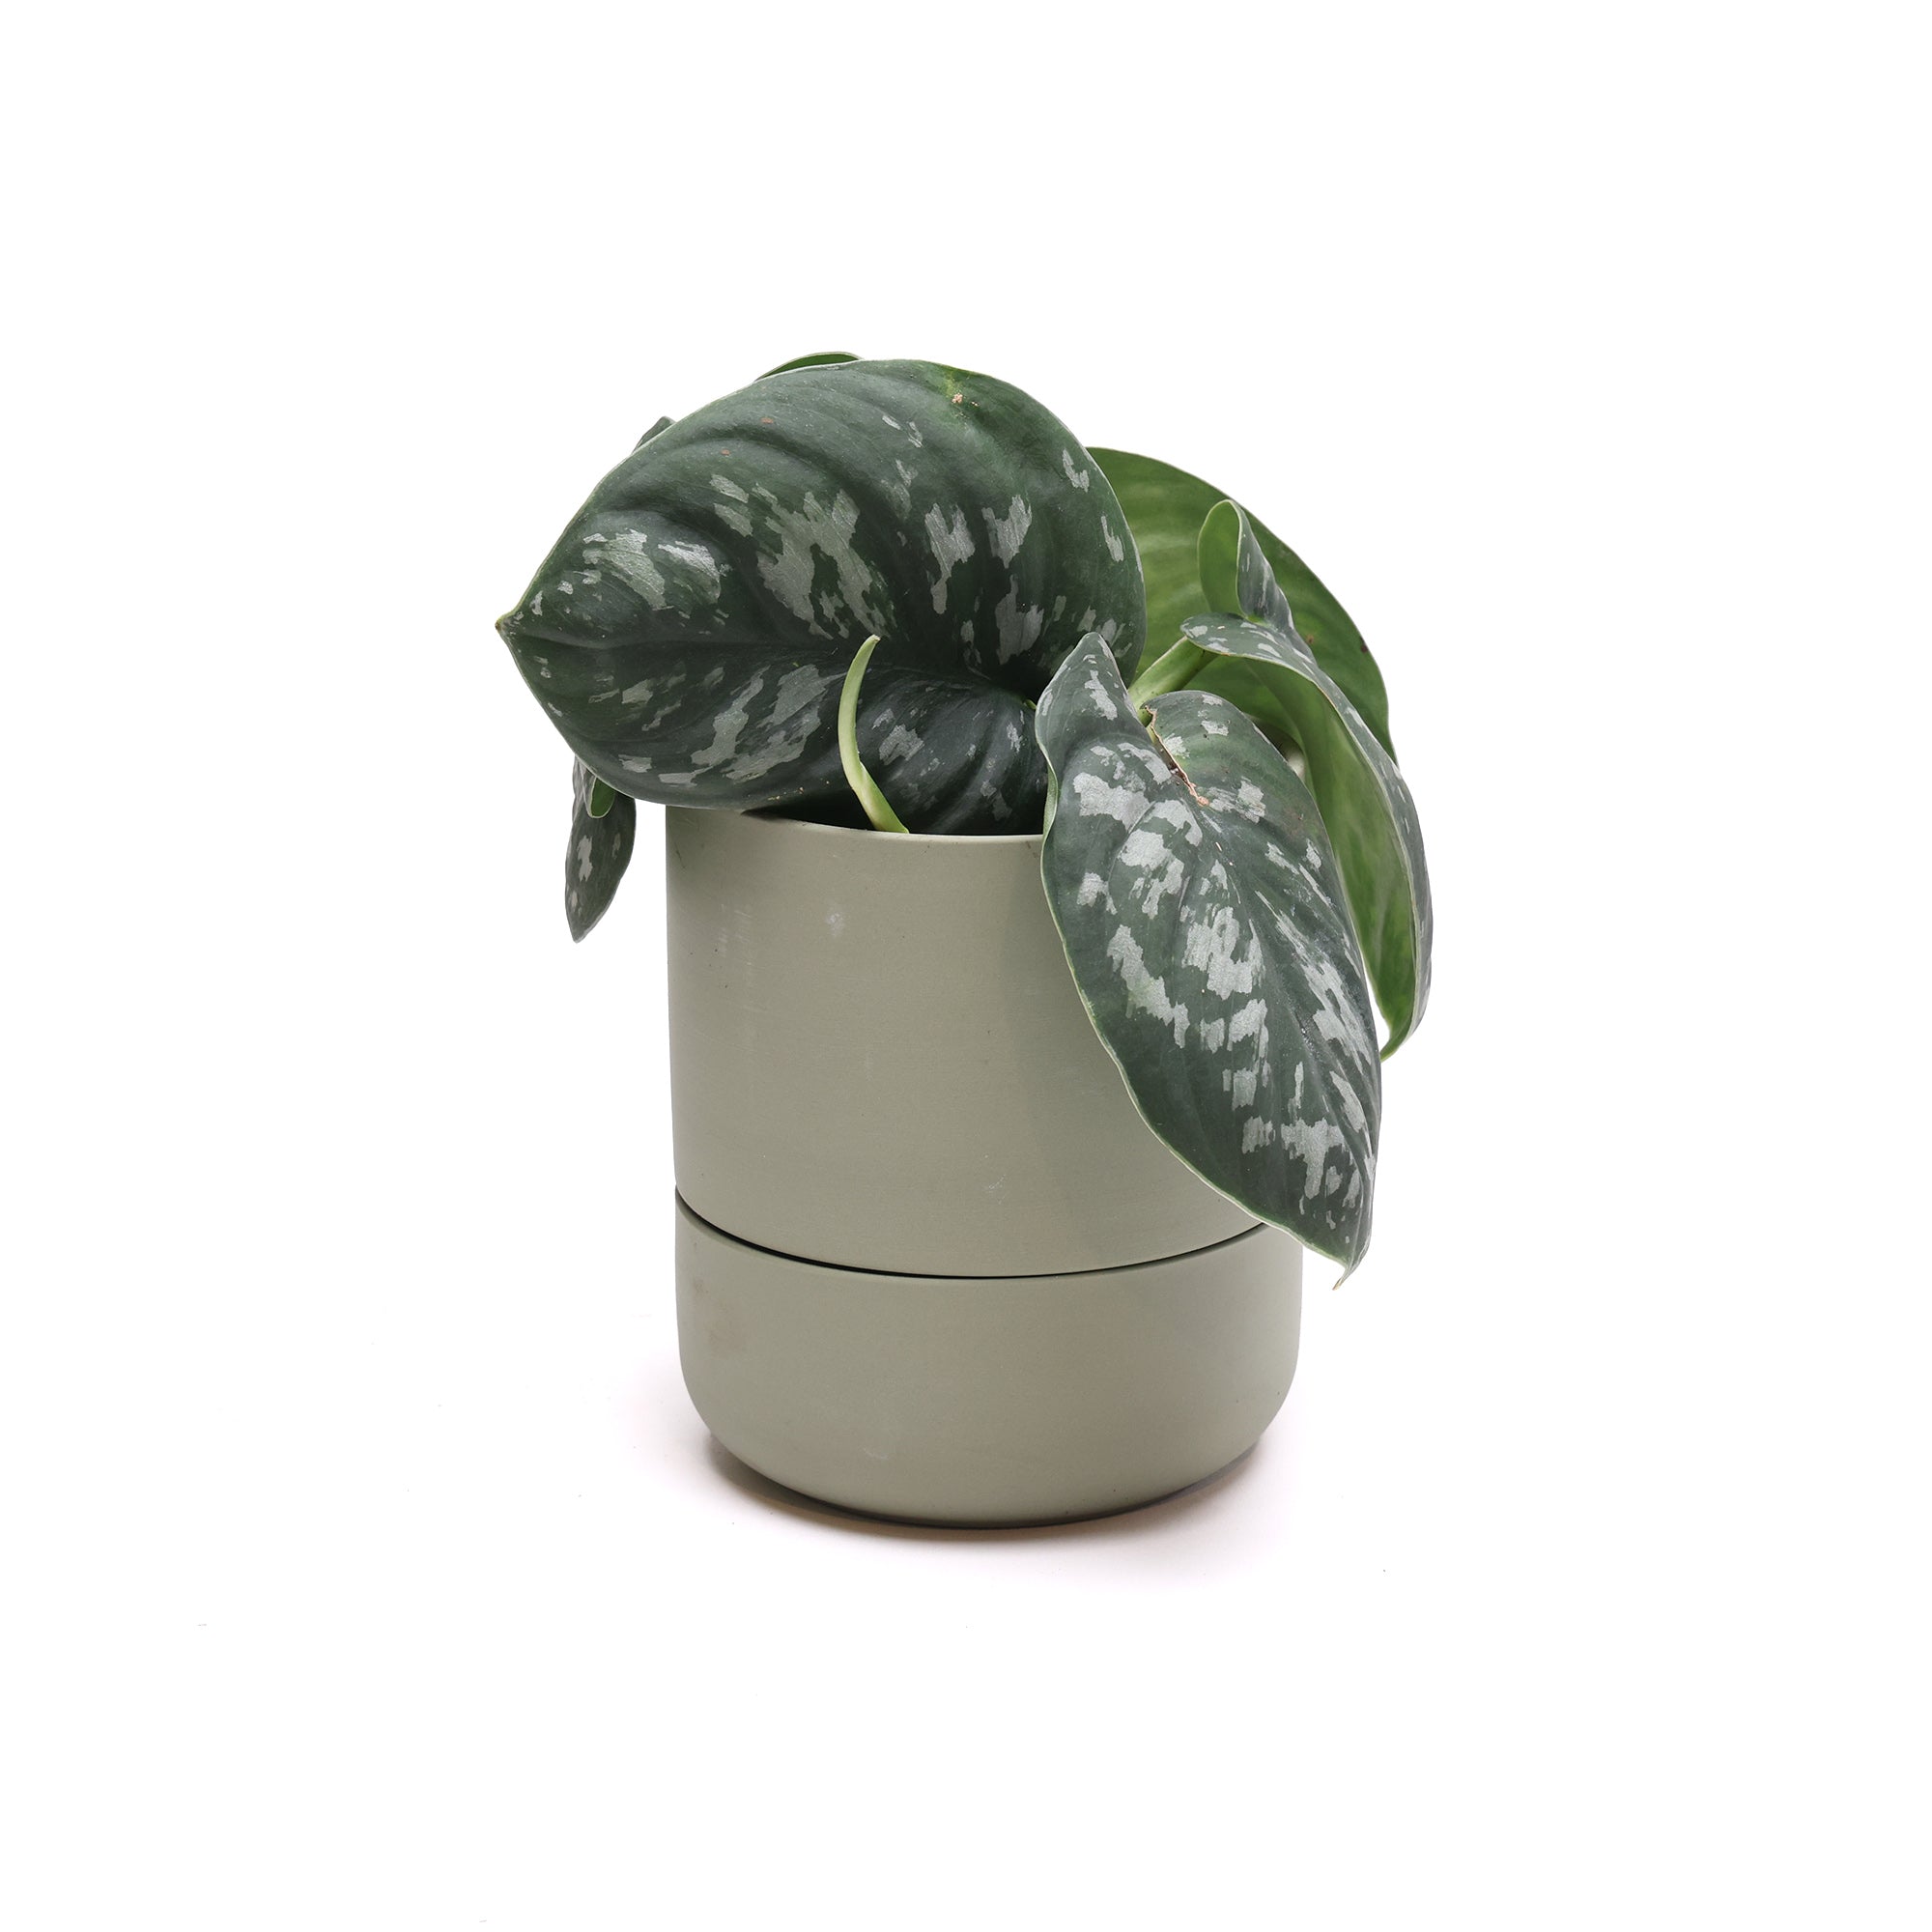 A Potted Philodendron Scindapsis 6” plant, an easy-care indoor plant, with variegated silver and green leaves in a simple light green self-watering pot against a white background by Chive Studio.